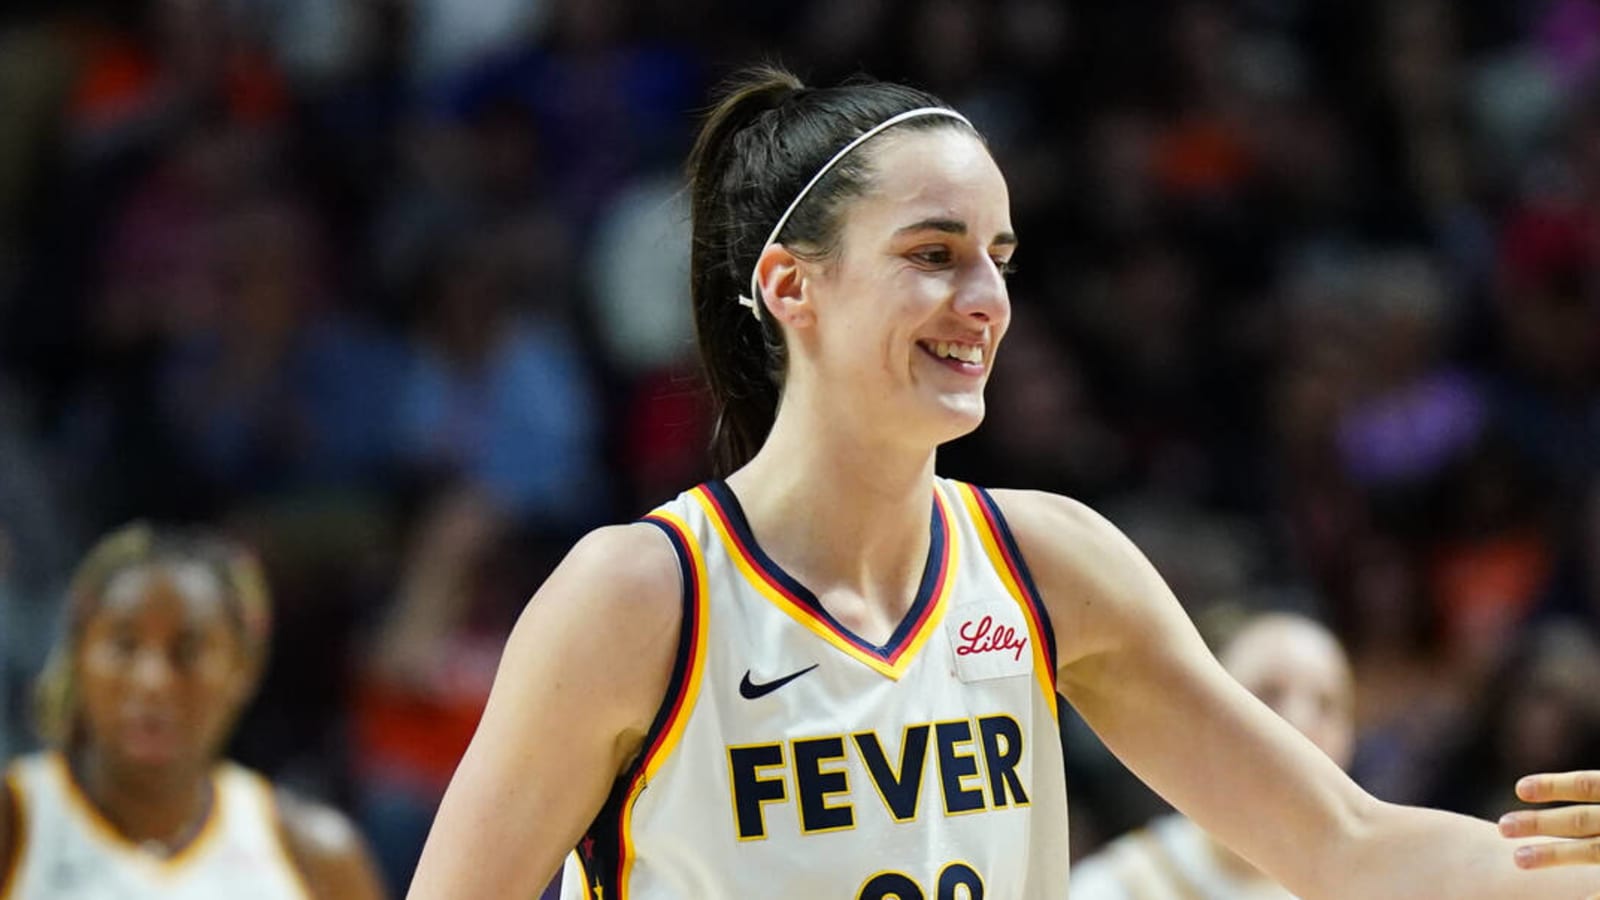 Caitlin Clark Reveals True Feelings on Tough WNBA Debut With Indiana Fever